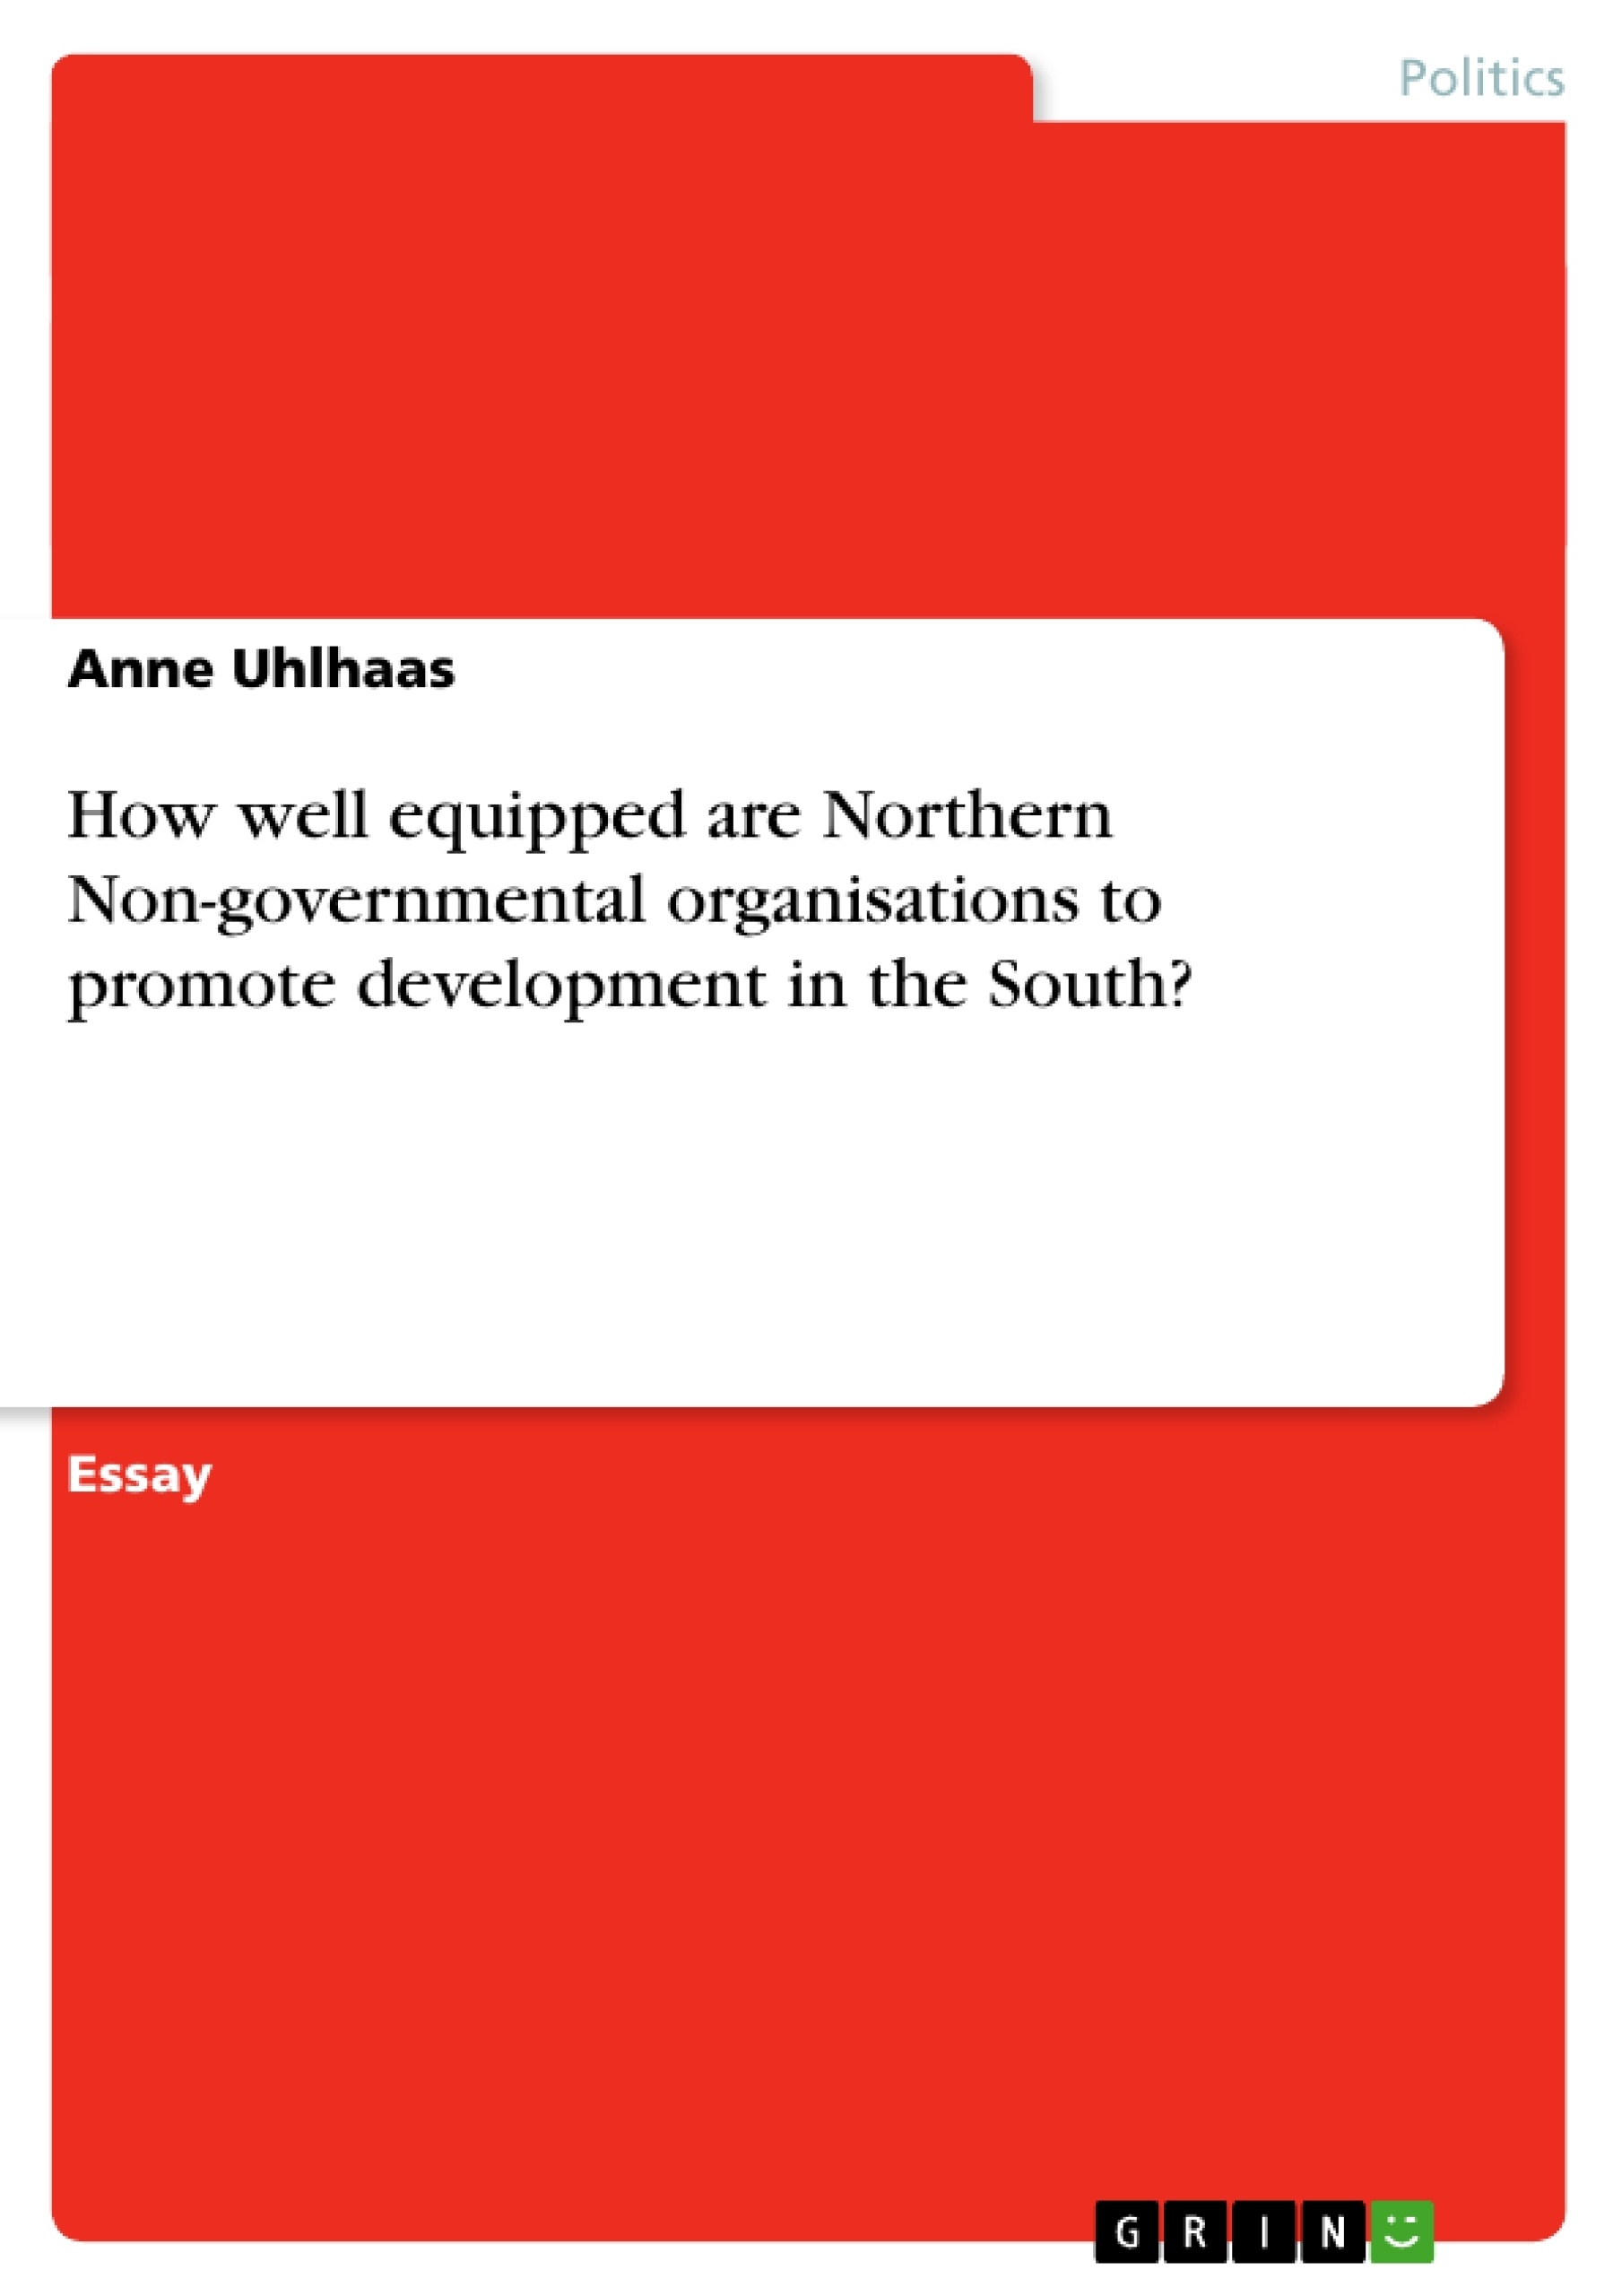 Titre: How well equipped are Northern Non-governmental organisations to promote development in the South?